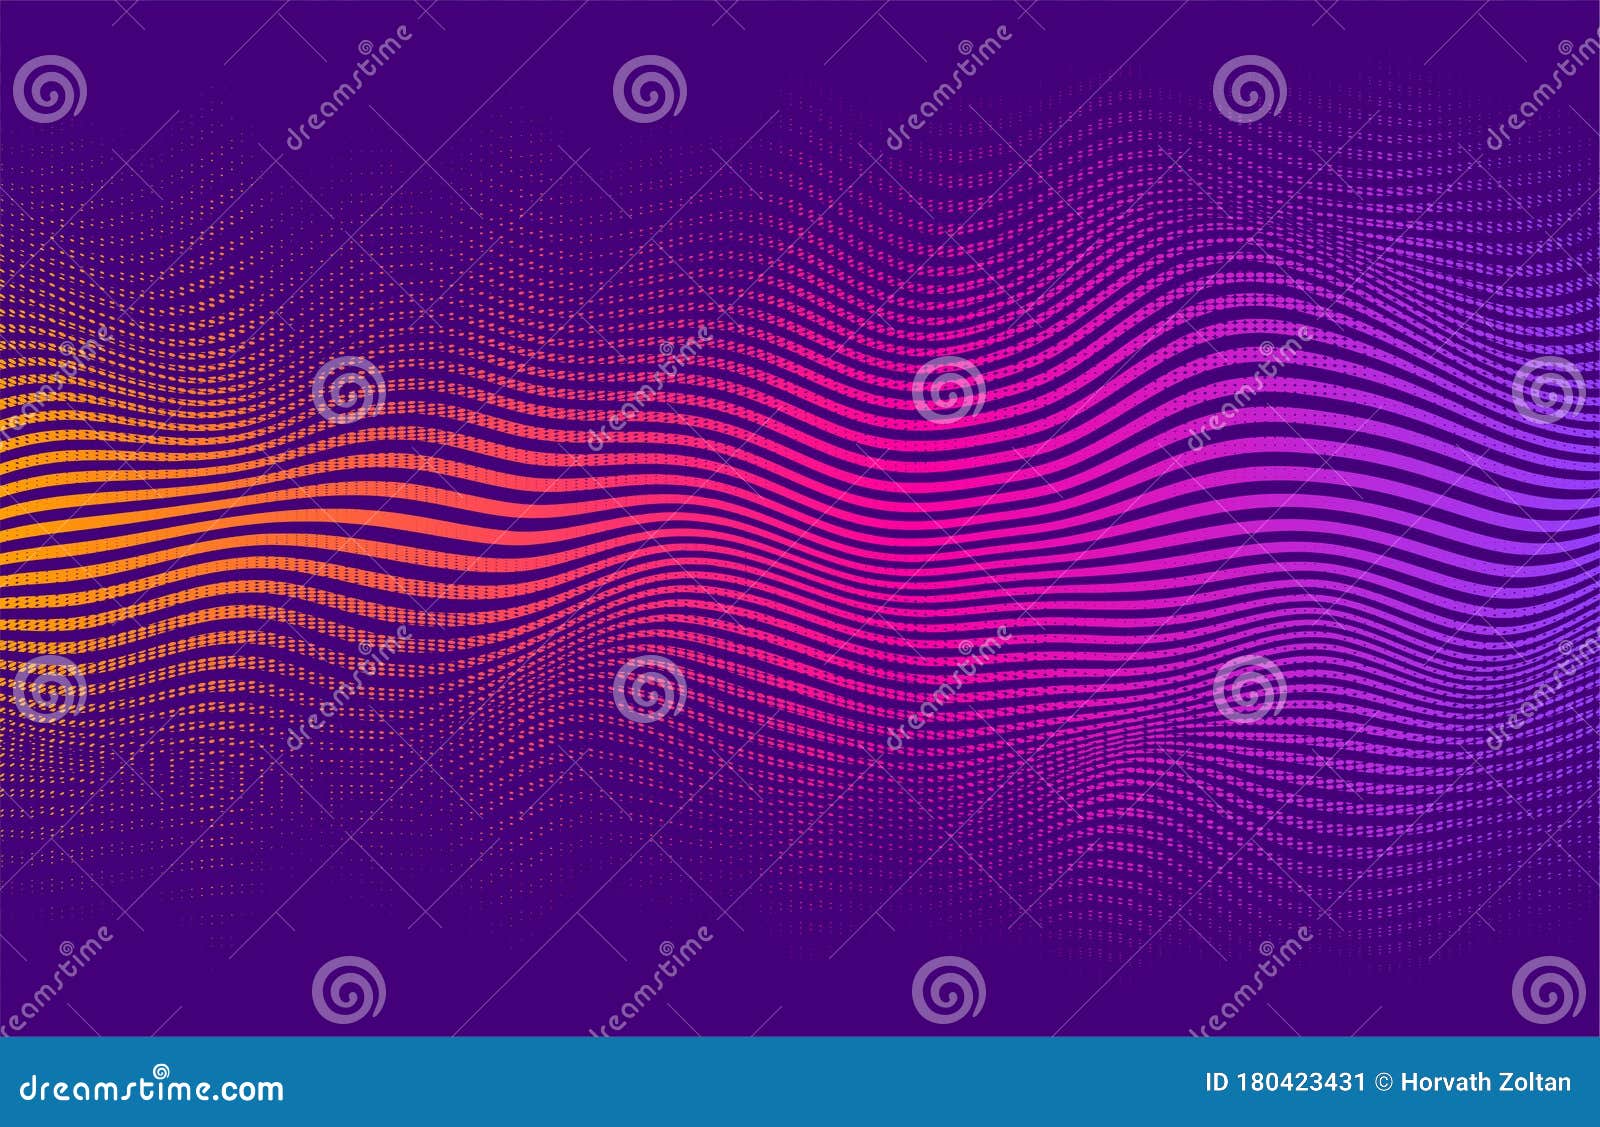 abstract halftone gradient, with blending colors and textures